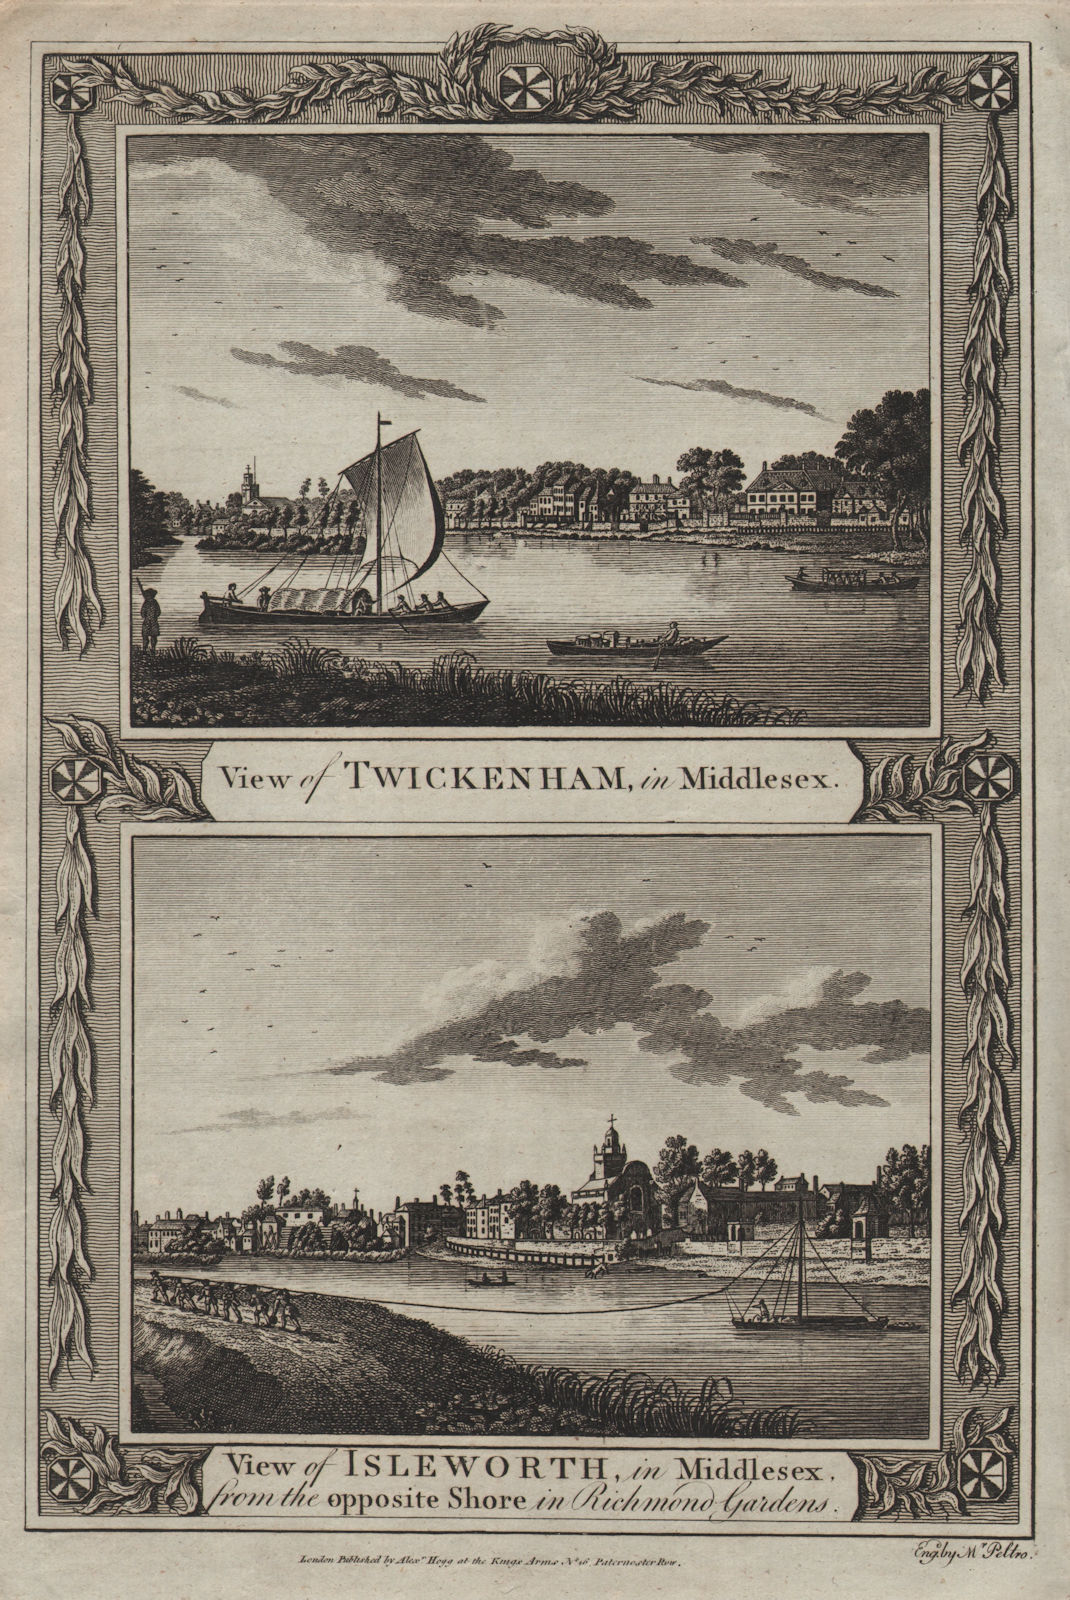 Views of Twickenham, and of Isleworth from Richmond Old Deer Park. THORNTON 1784